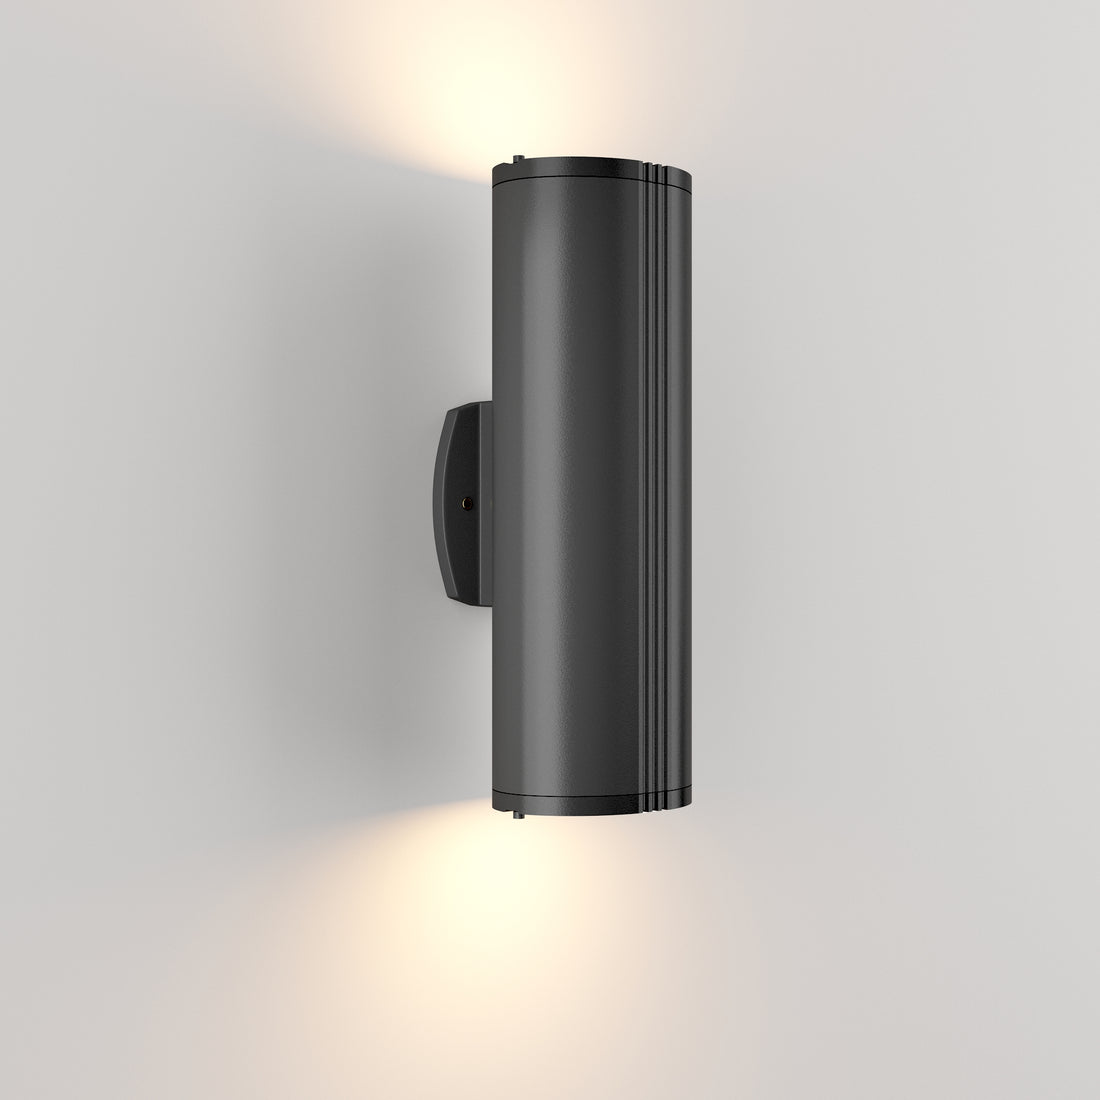 Evolution • Oval lined wall light with integrated LED 40 watts [1822]